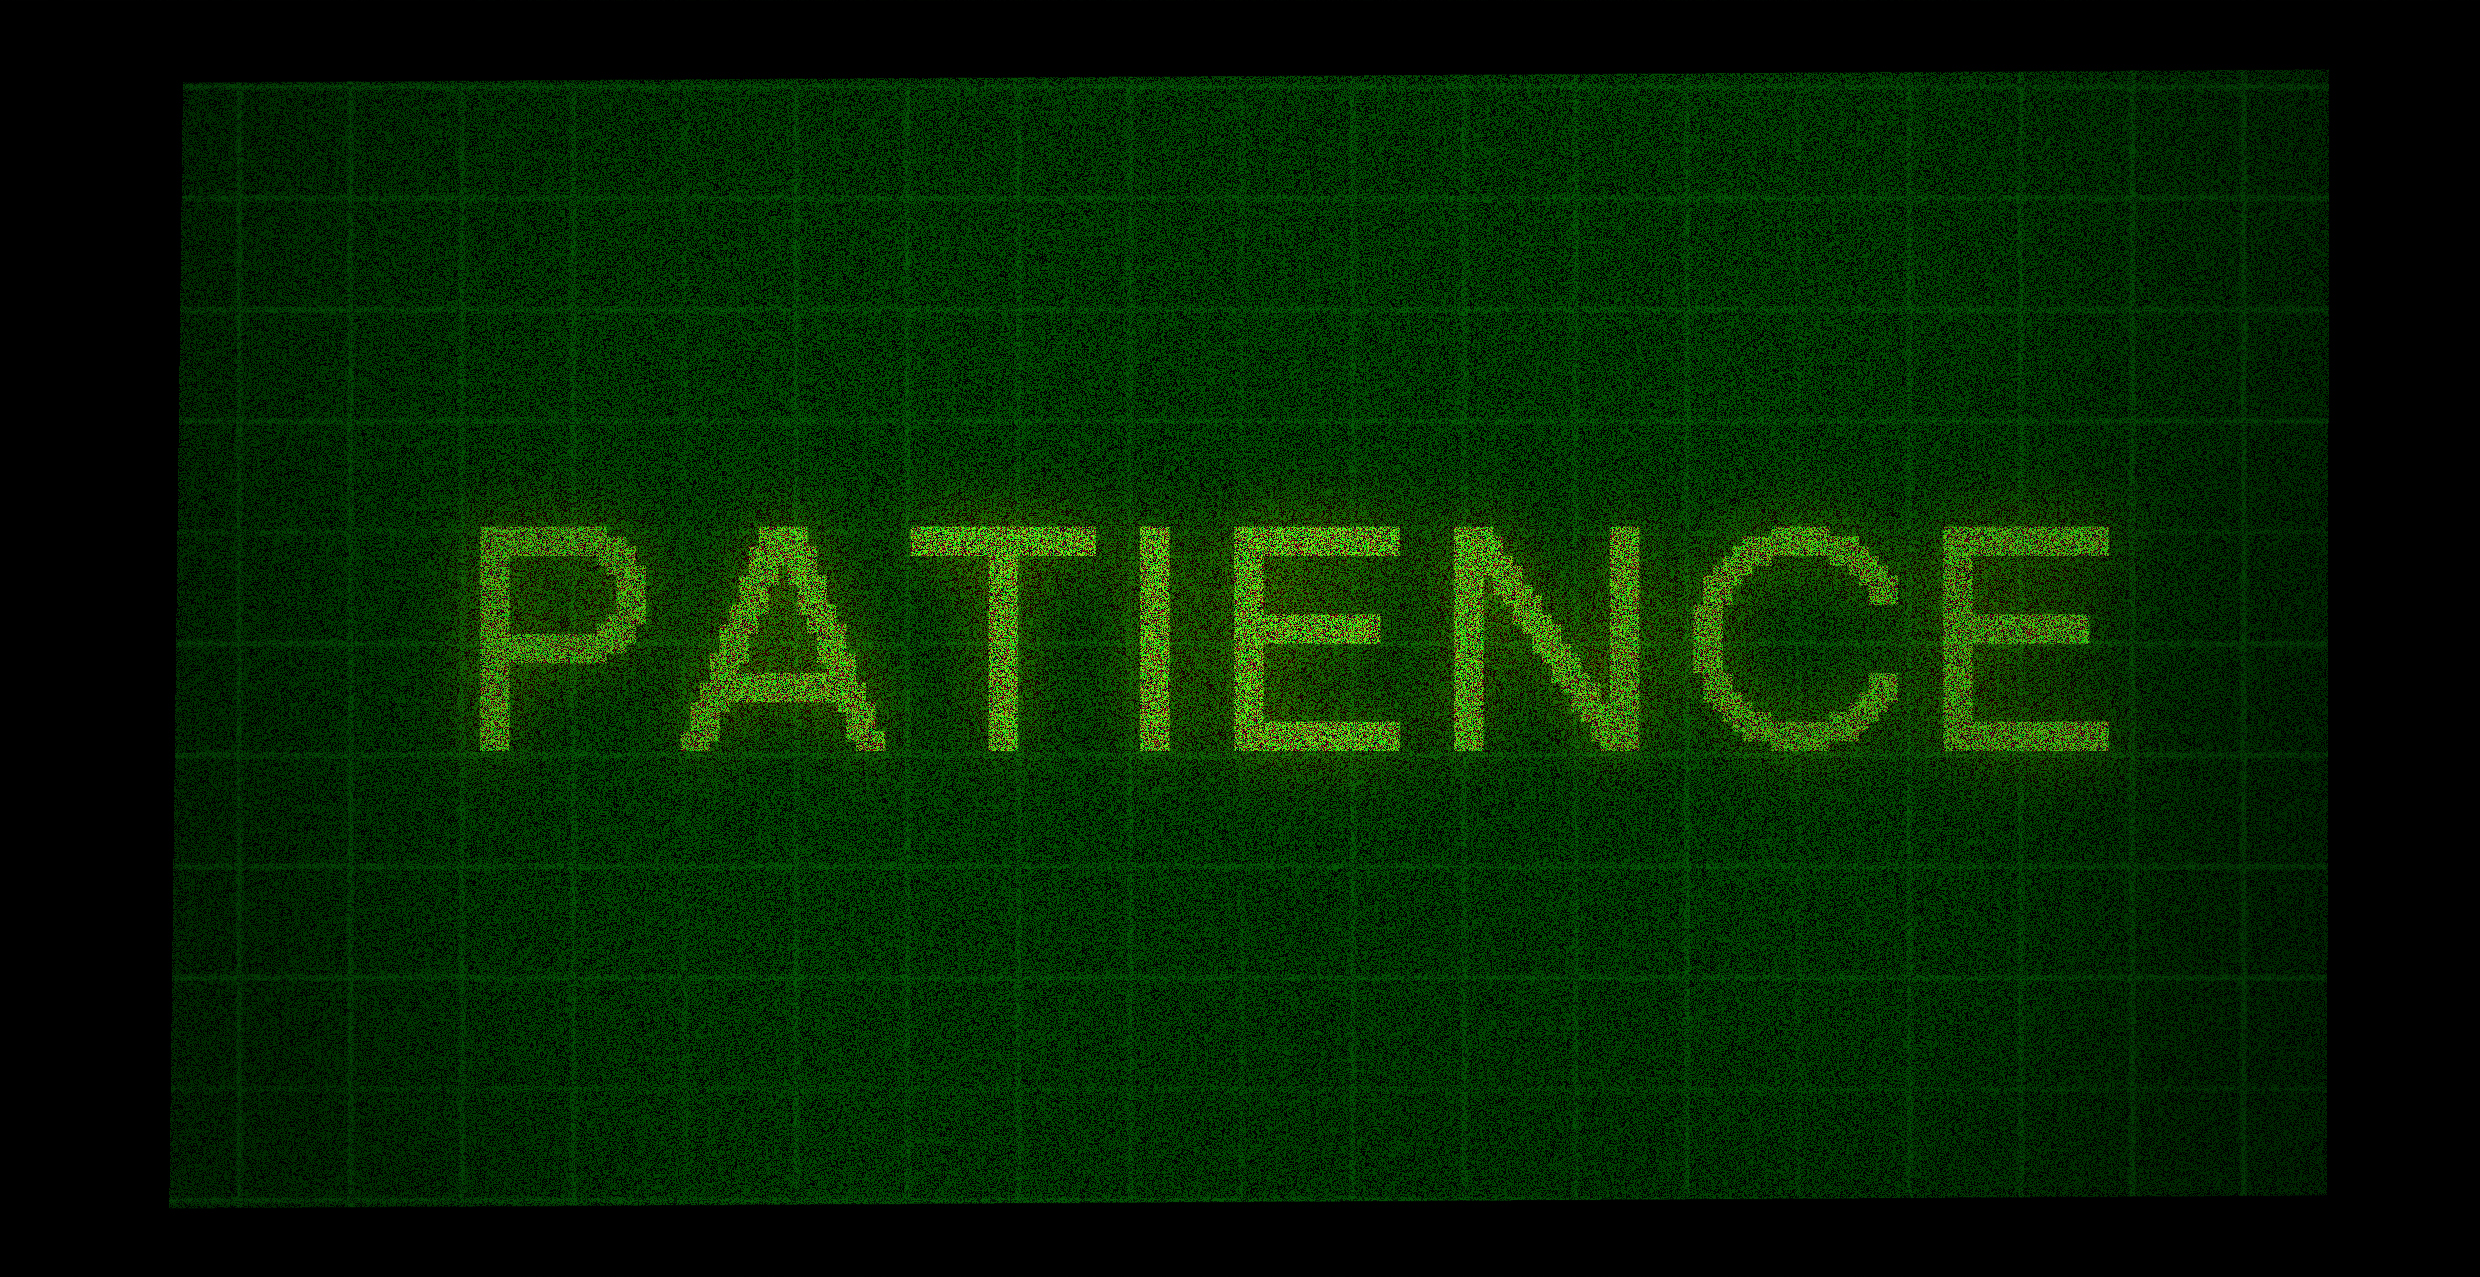 PATIENCE